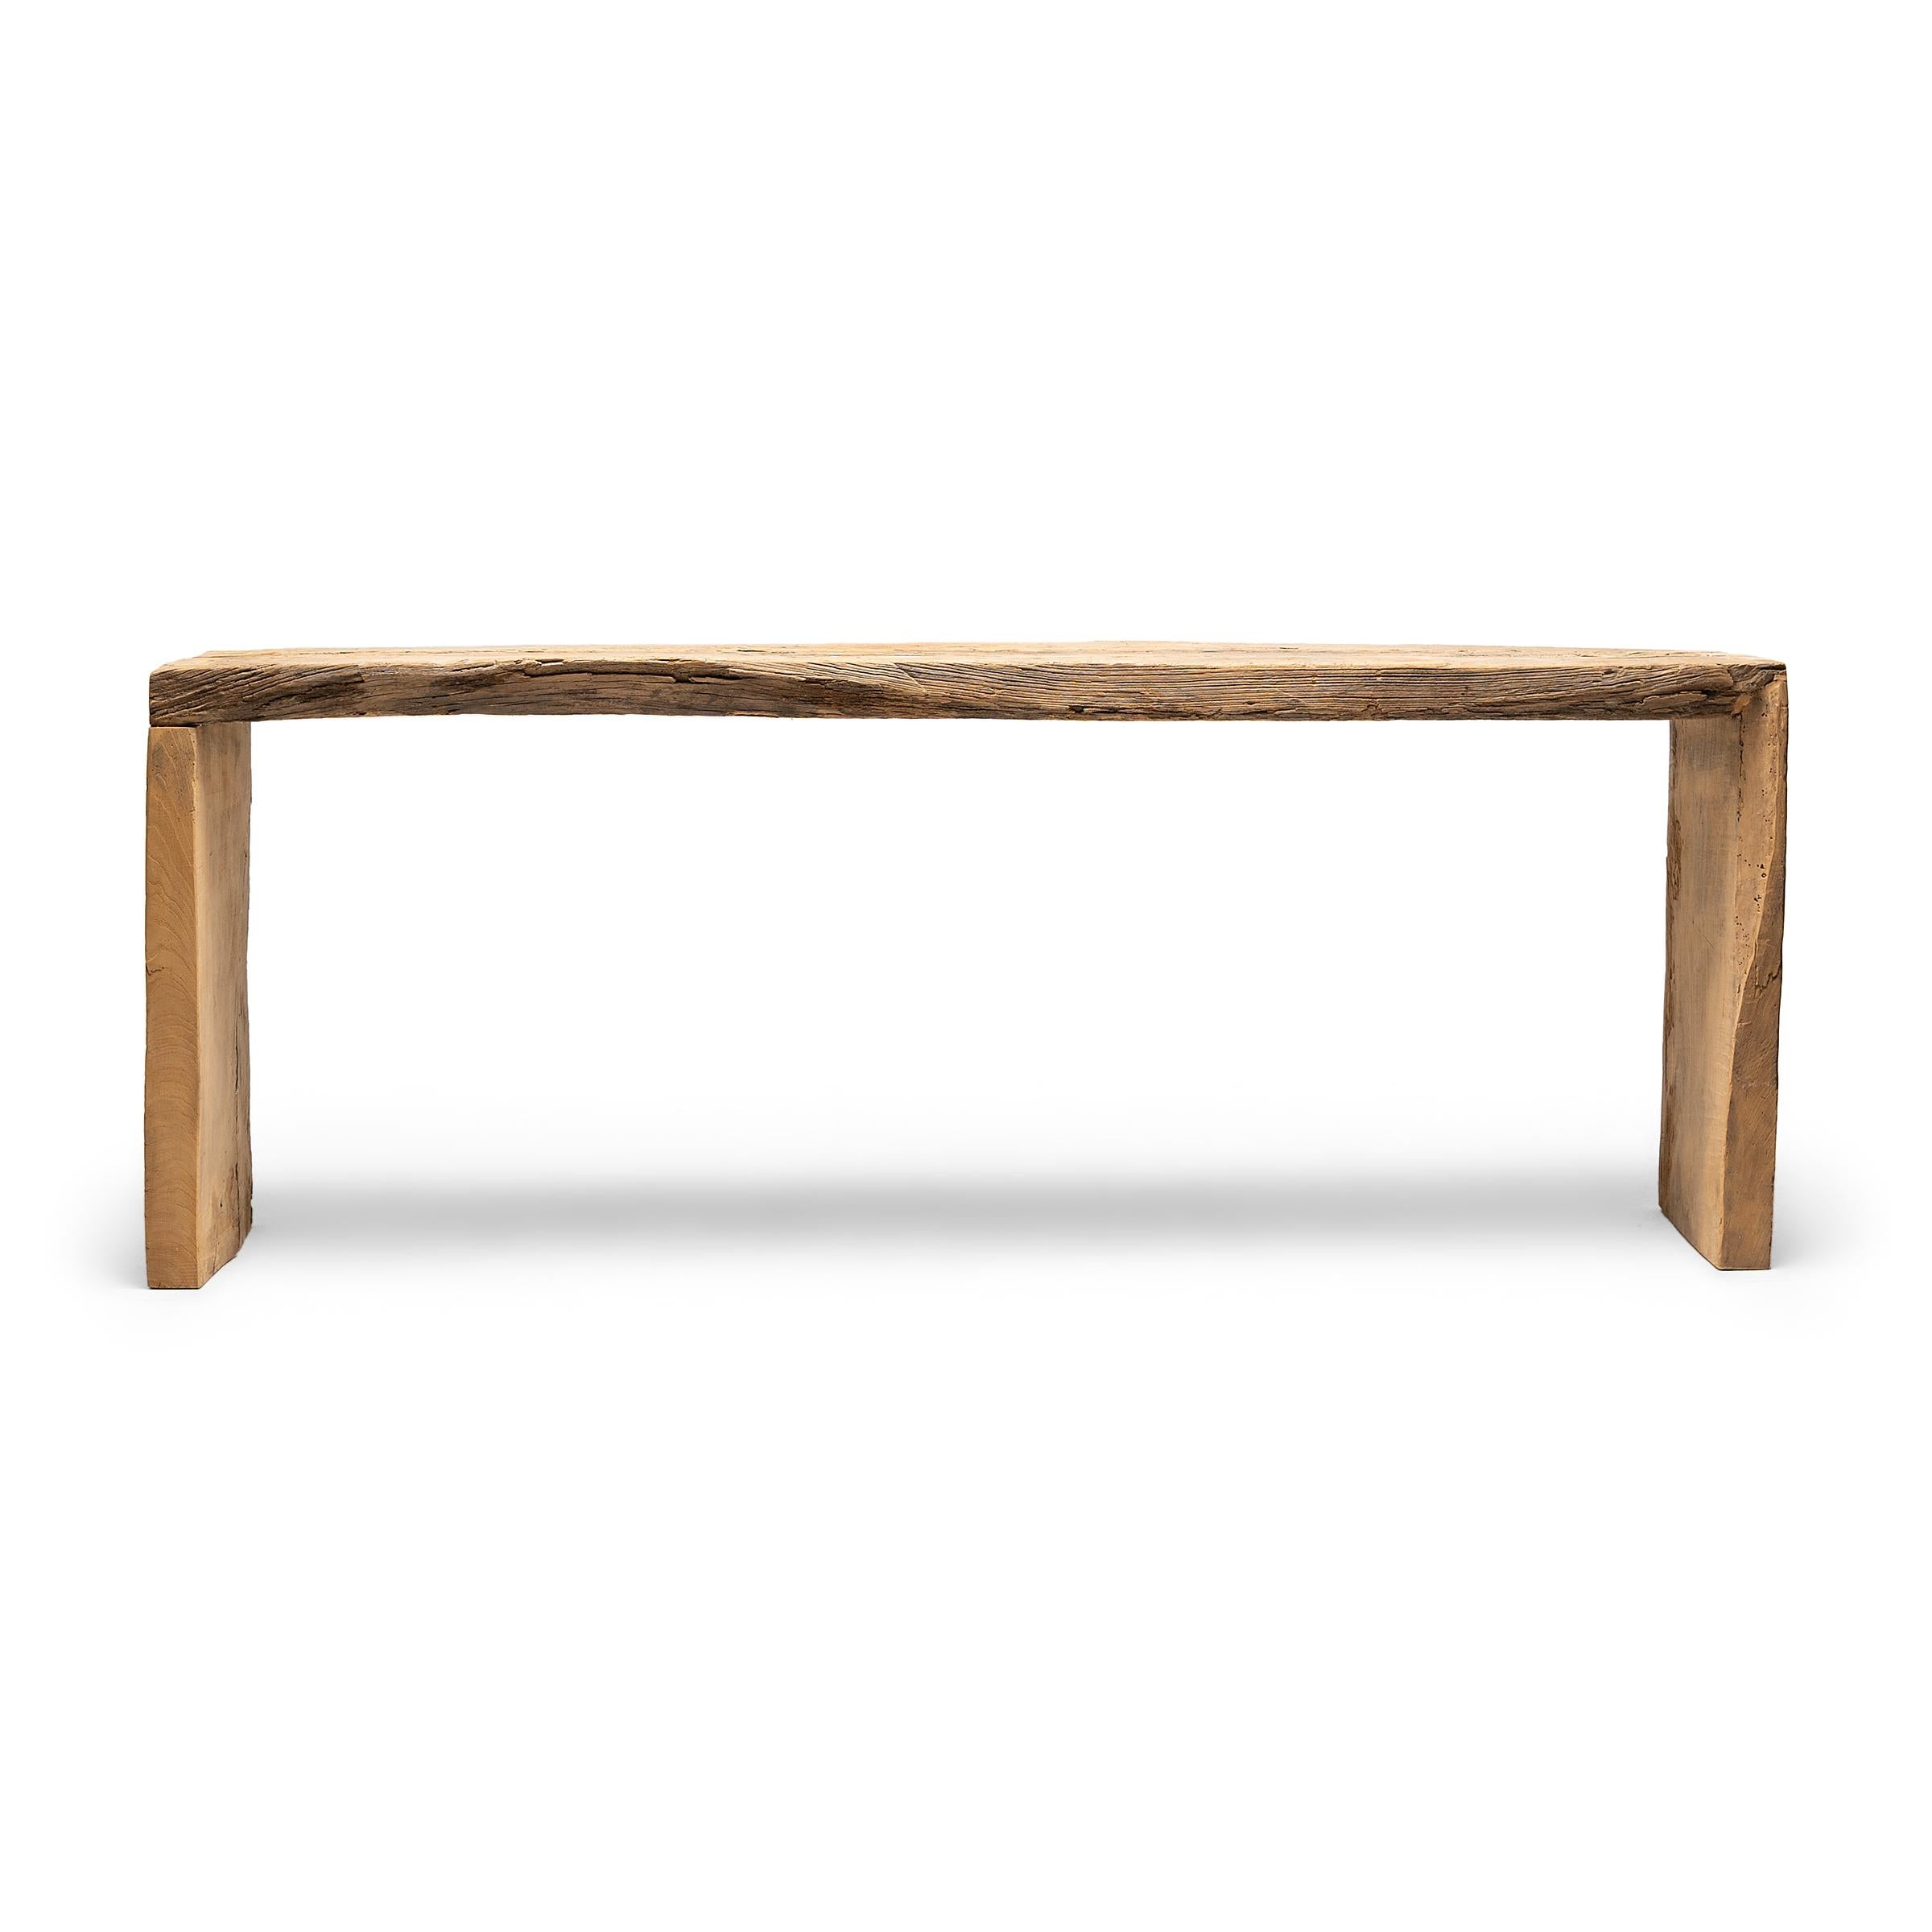 Contemporary Chinese Reclaimed Elm Waterfall Table